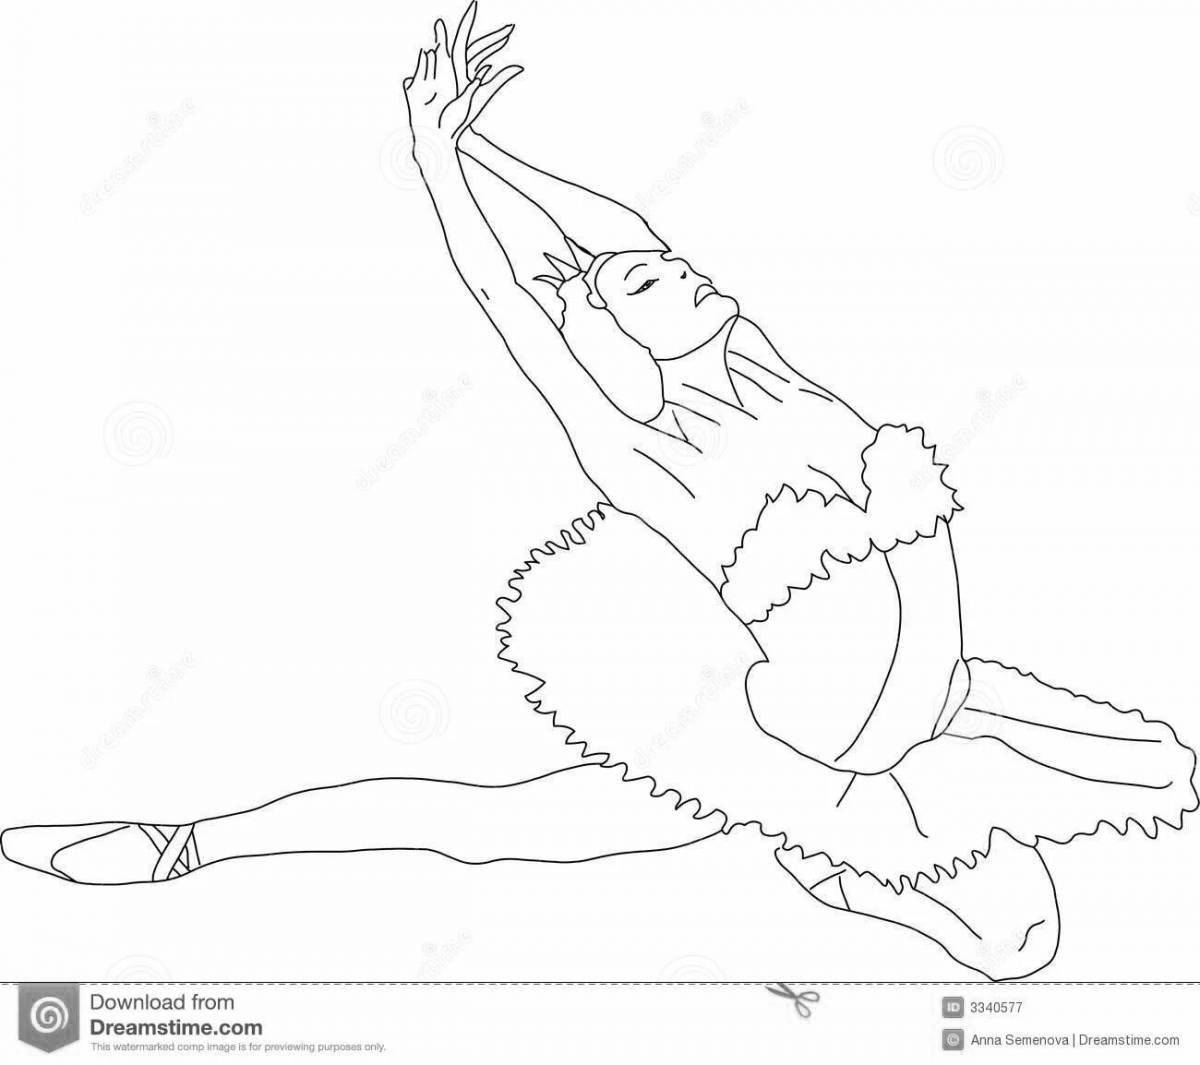 Quirky swan lake coloring book for beginners